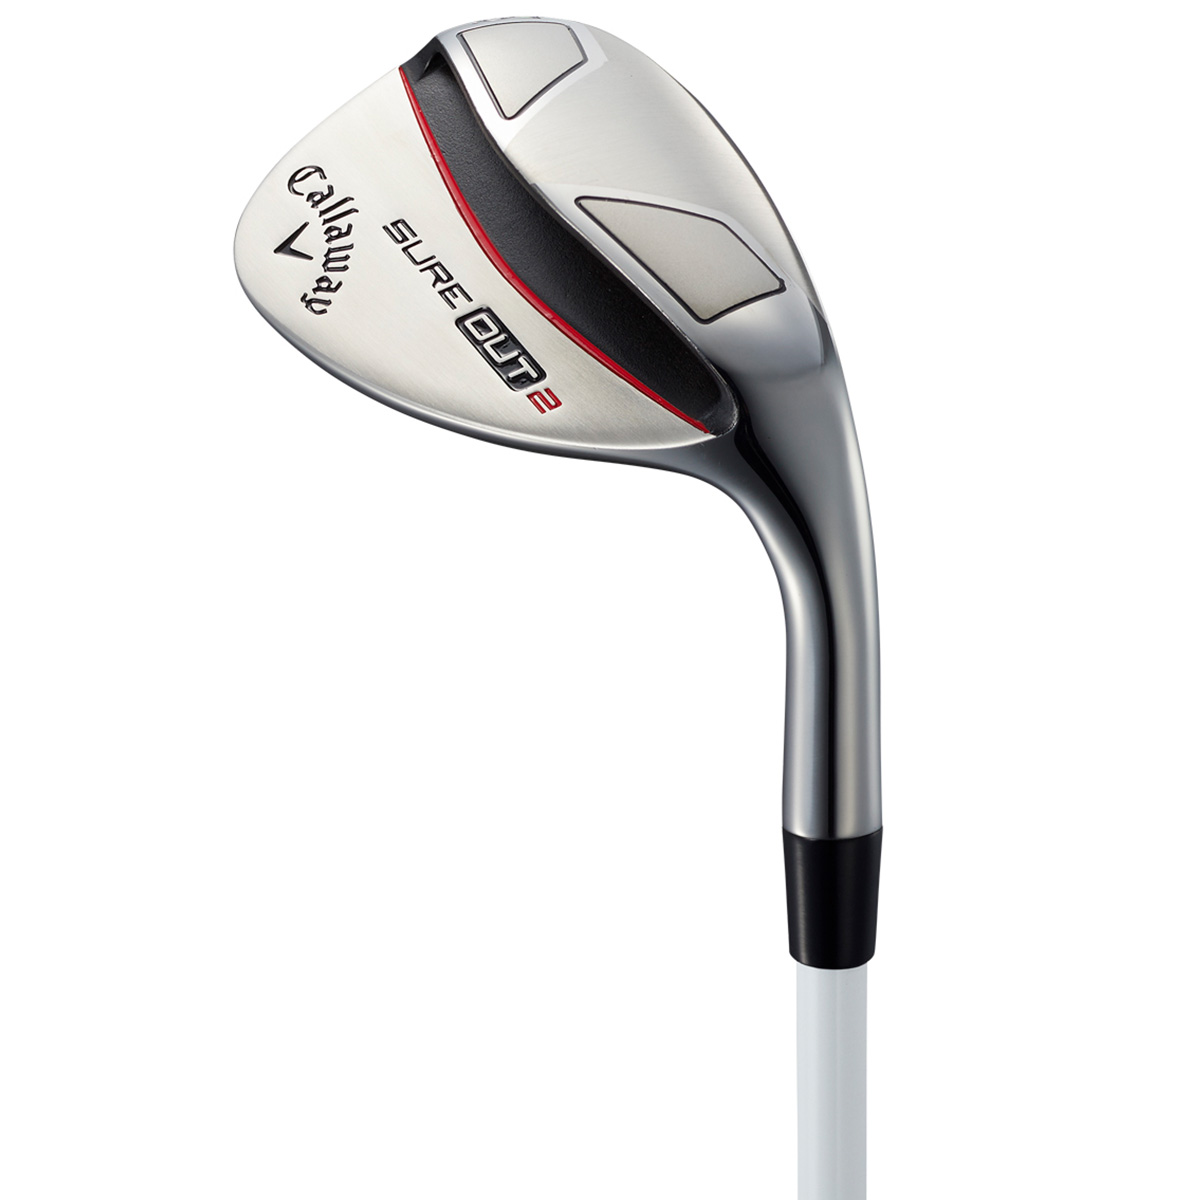  SURE OUT 2 ウェッジ MCI for Callaway WG4 WHITE レディス